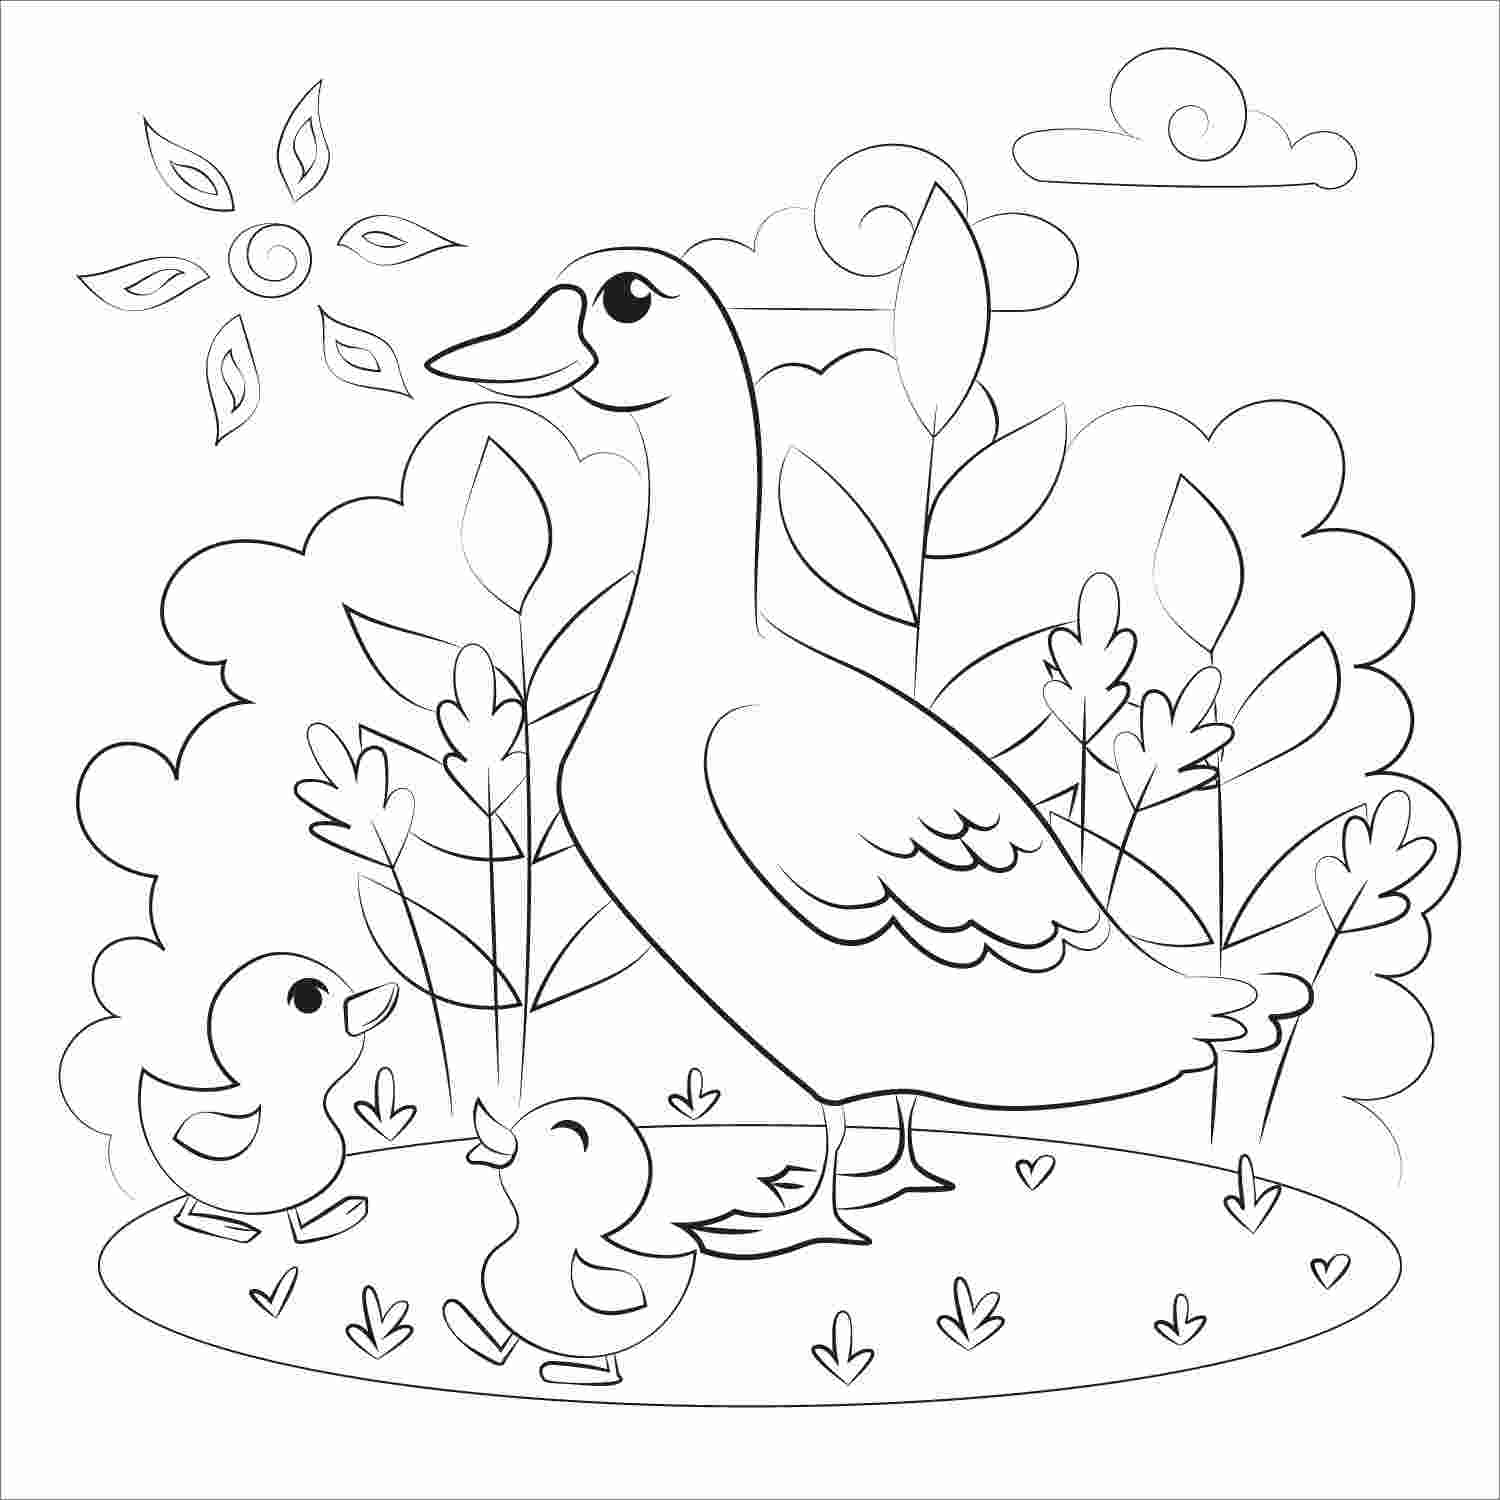 Mother duck and baby ducklings go around on the sunny day Coloring Pages